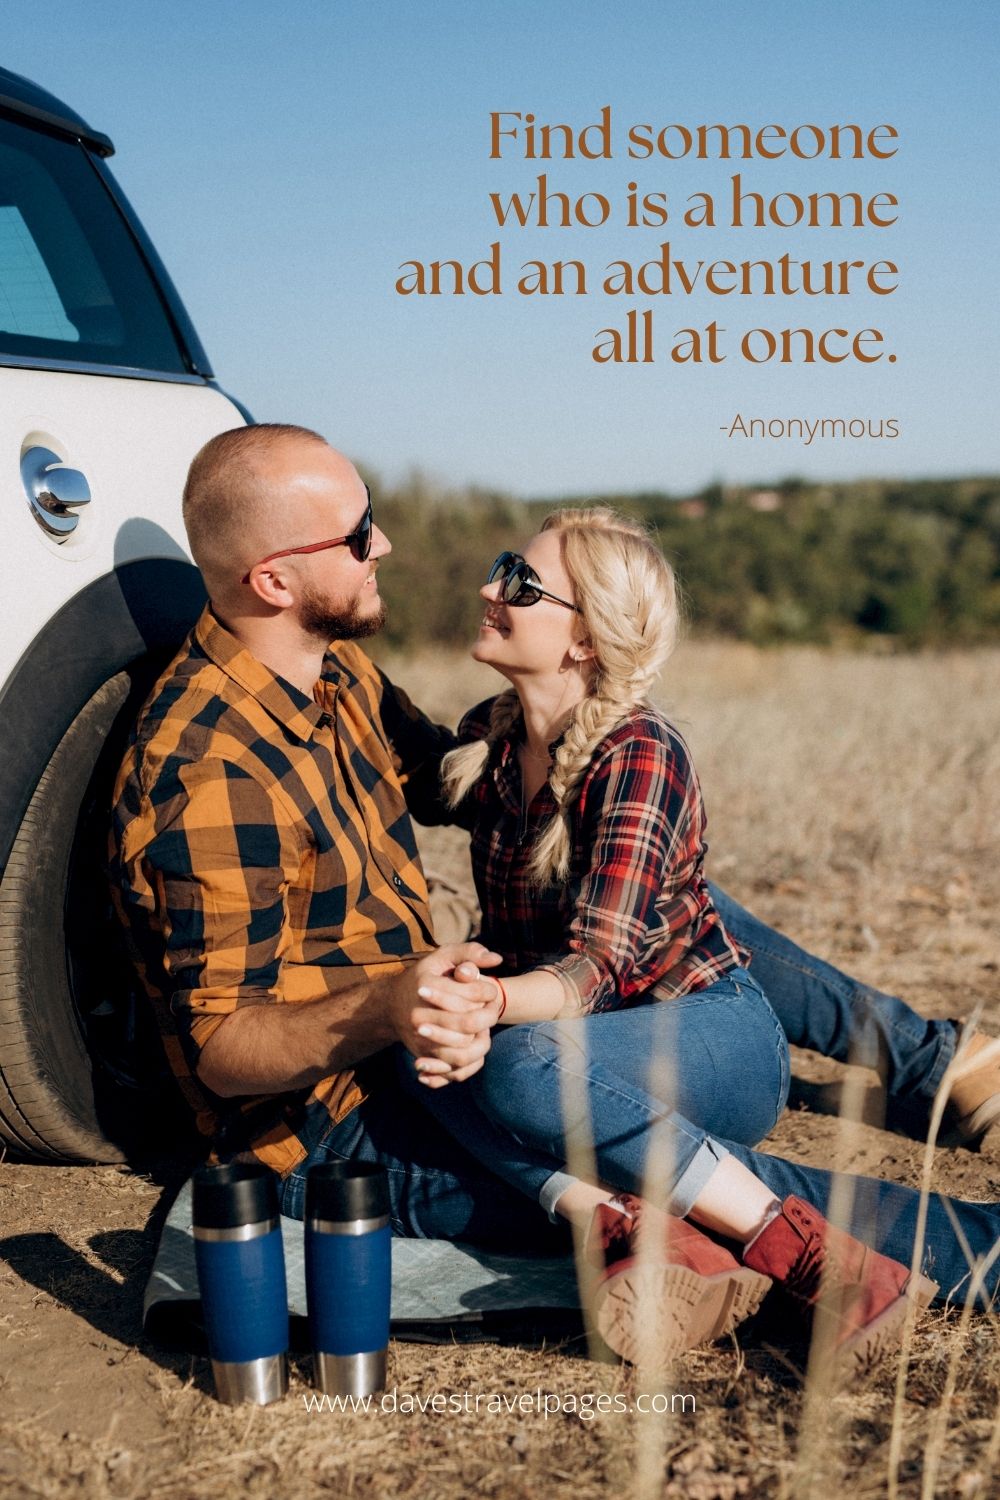 Couples Adventure Book  Take a Page from Our Adventures